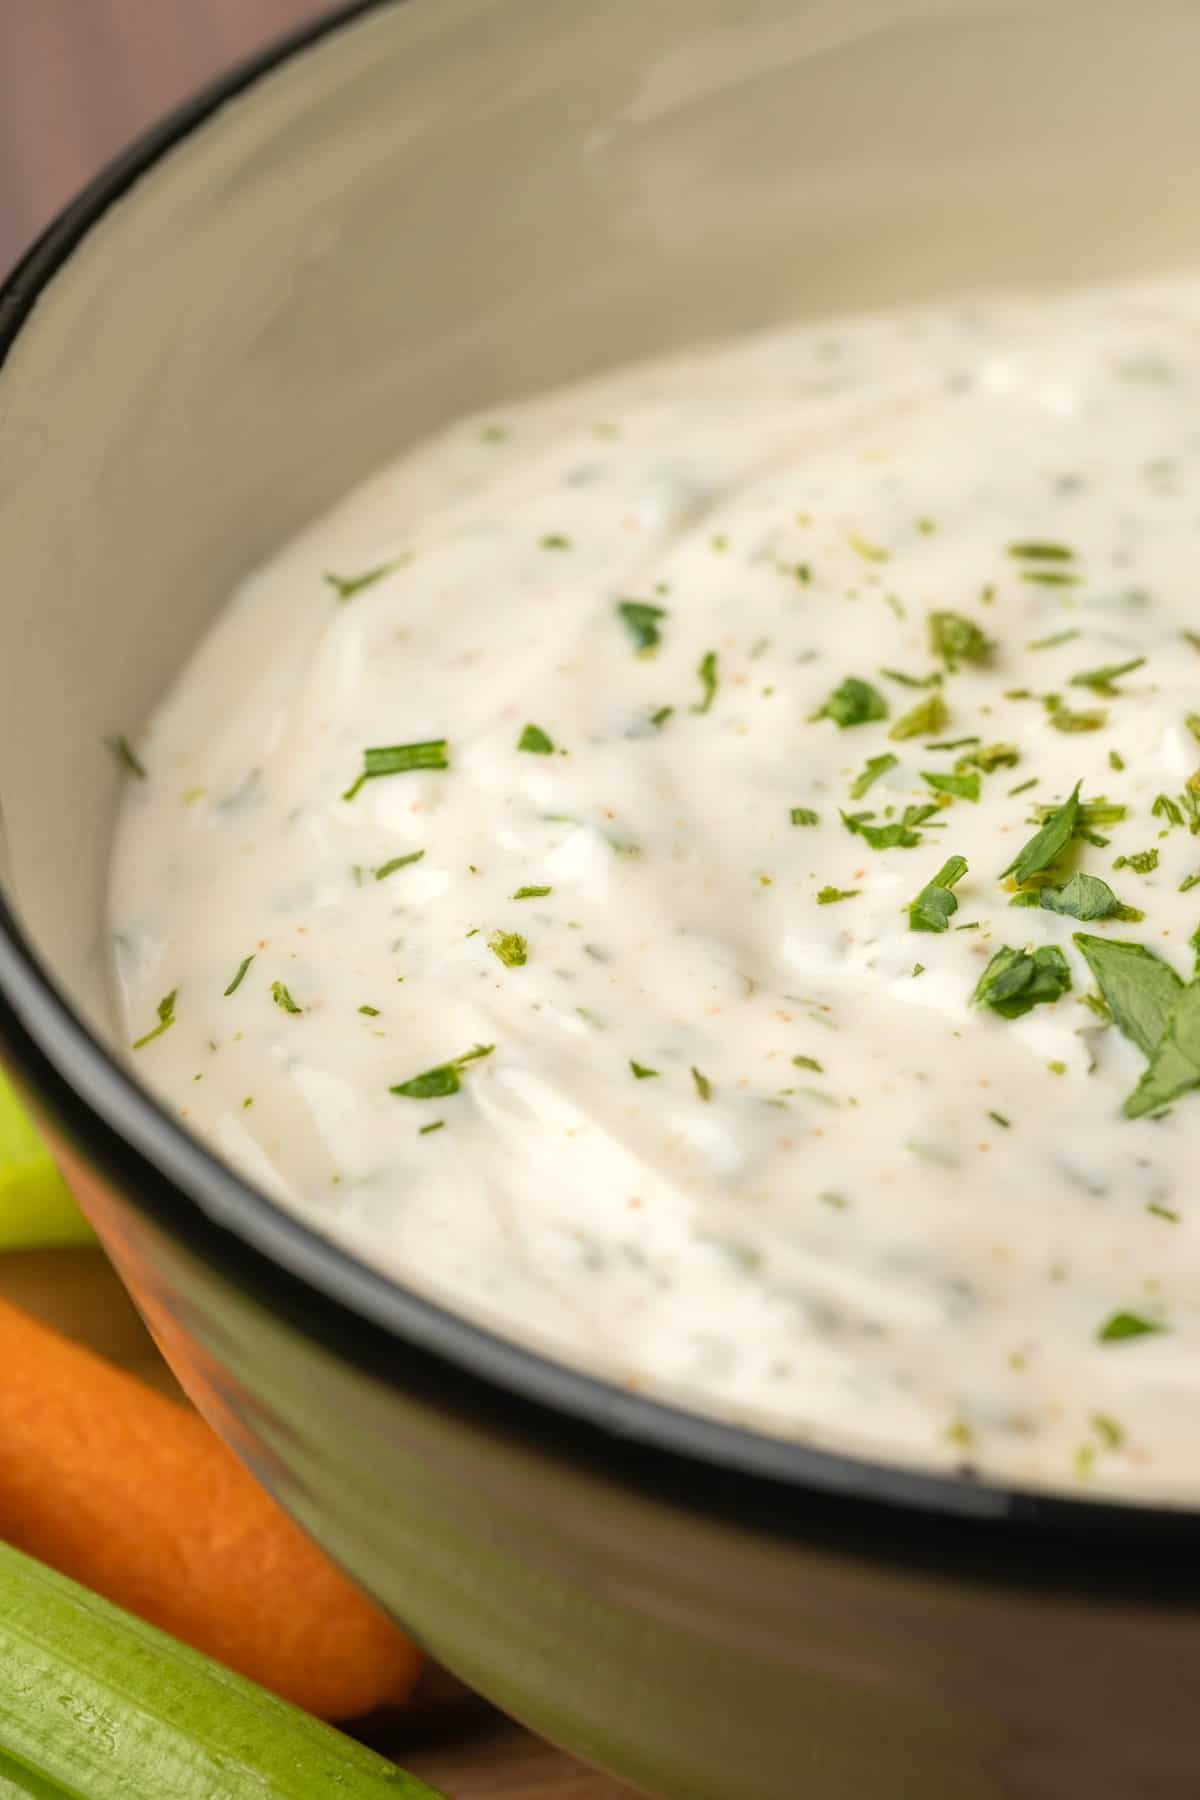 Featured image for “Dilly Ranch Dip”